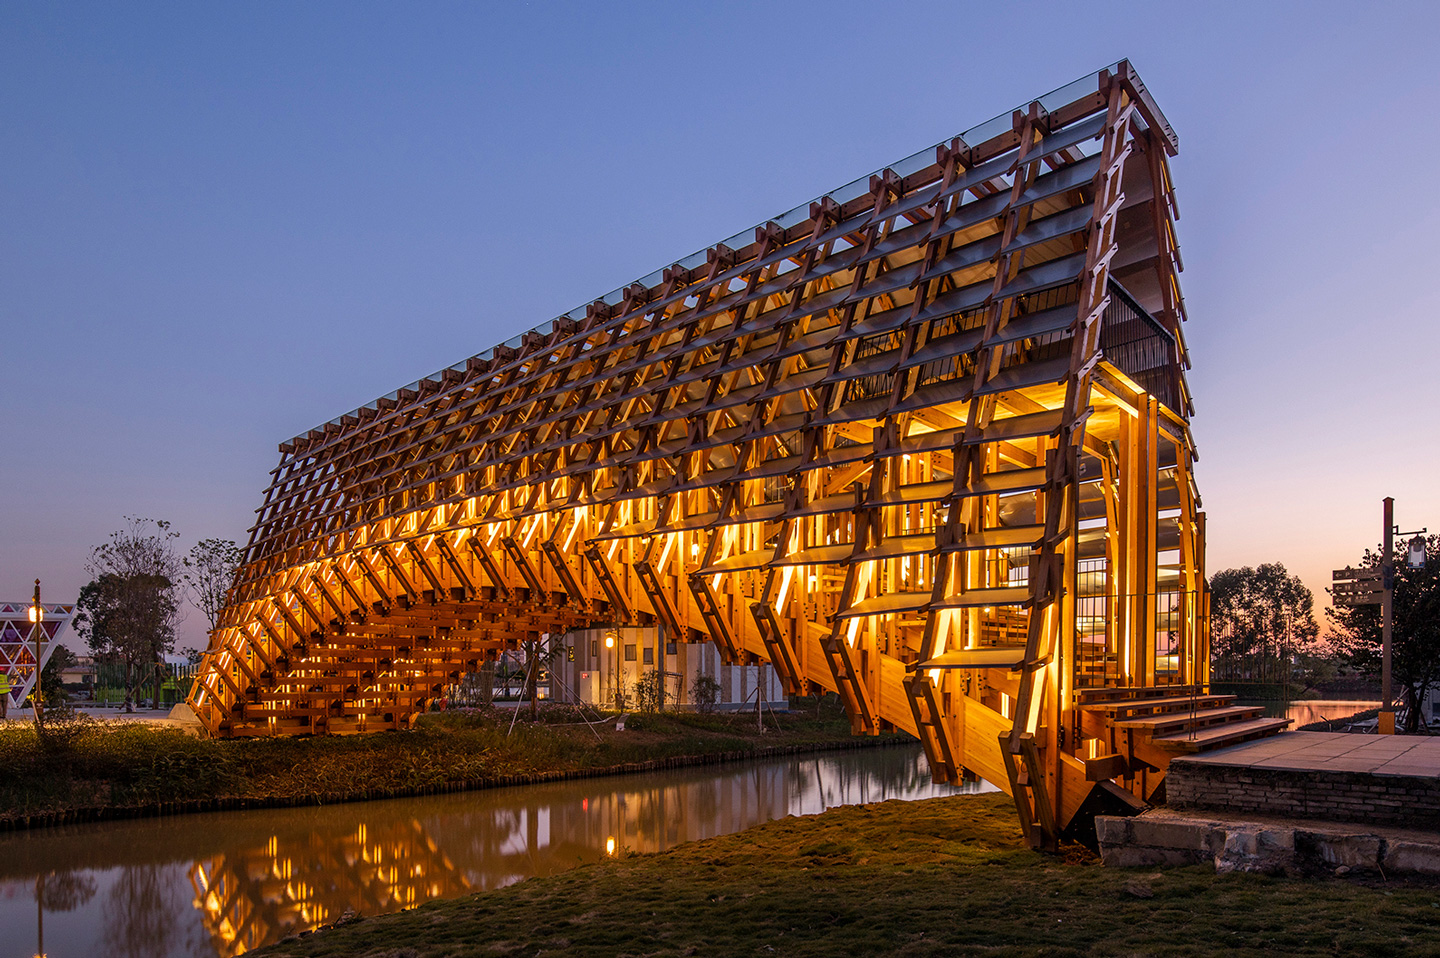 #Unique bridge explores a complex structure made from individual pieces of timber wood